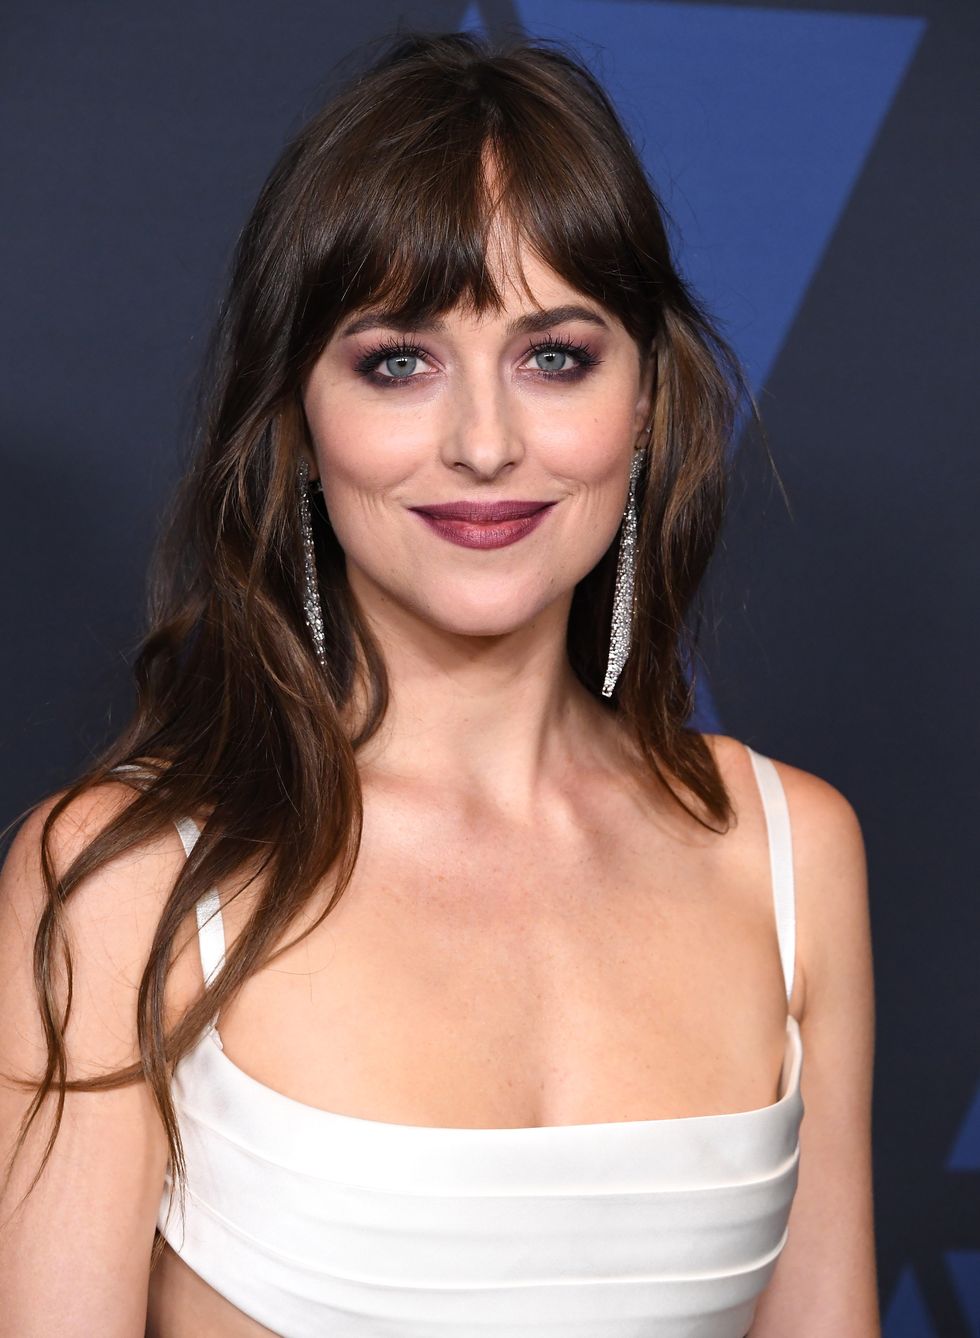 hollywood, california october 27 dakota johnson arrives at the academy of motion picture arts and sciences 11th annual governors awards at the ray dolby ballroom at hollywood highland center on october 27, 2019 in hollywood, california photo by steve granitzwireimage